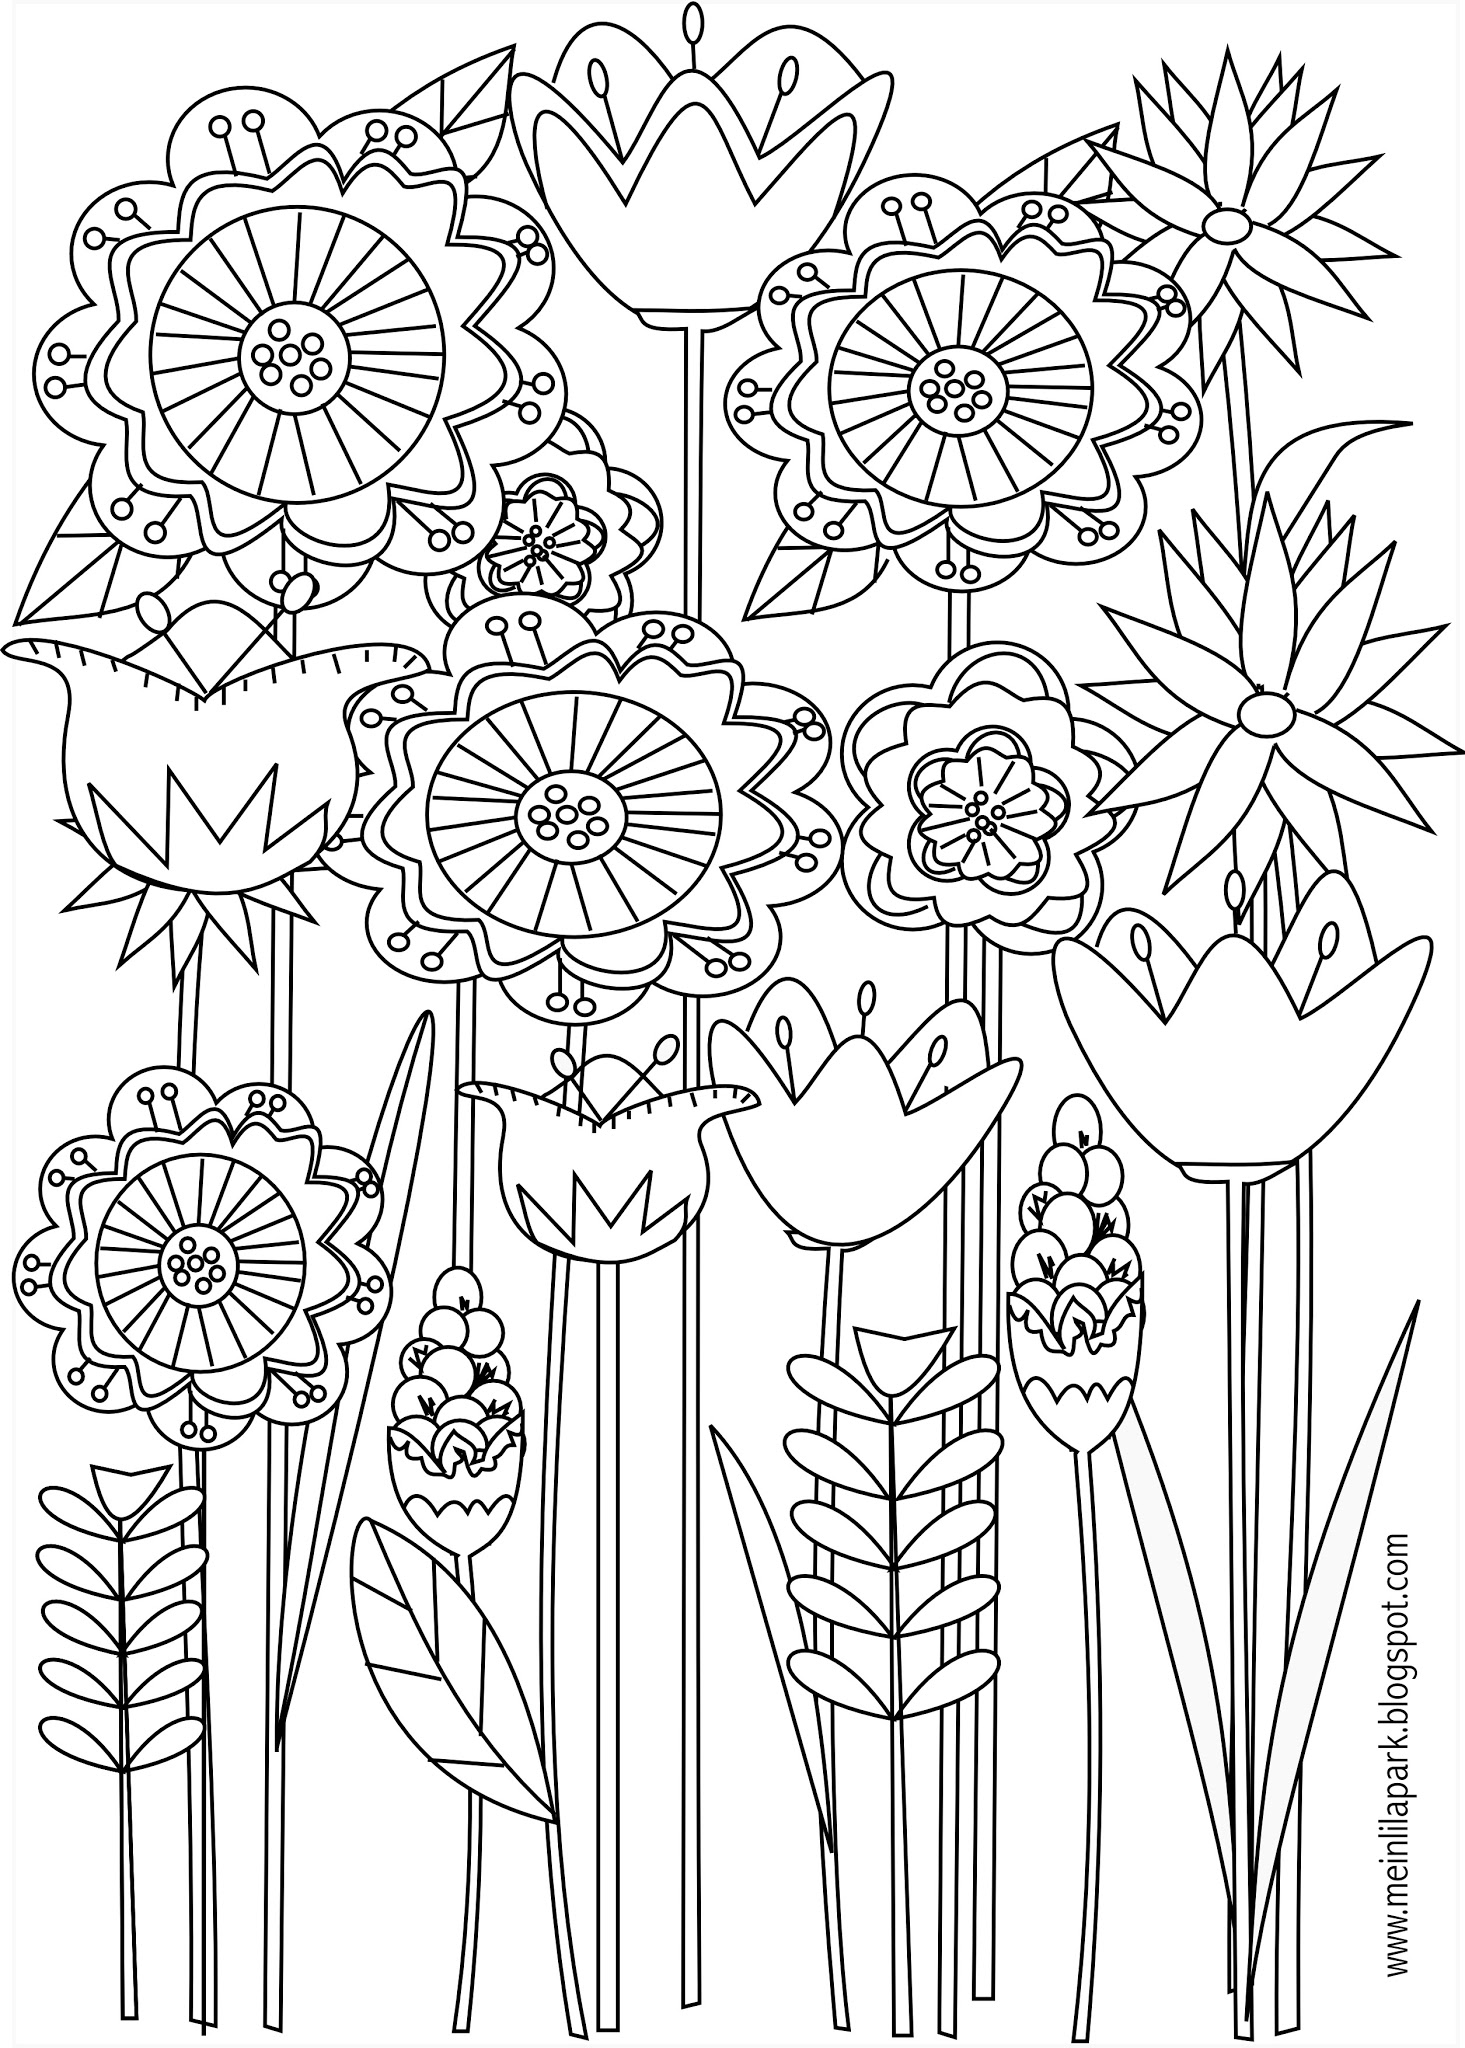 Download Printable Coloring Pages Flowers To Print - 314+ File Include SVG PNG EPS DXF for Cricut, Silhouette and Other Machine